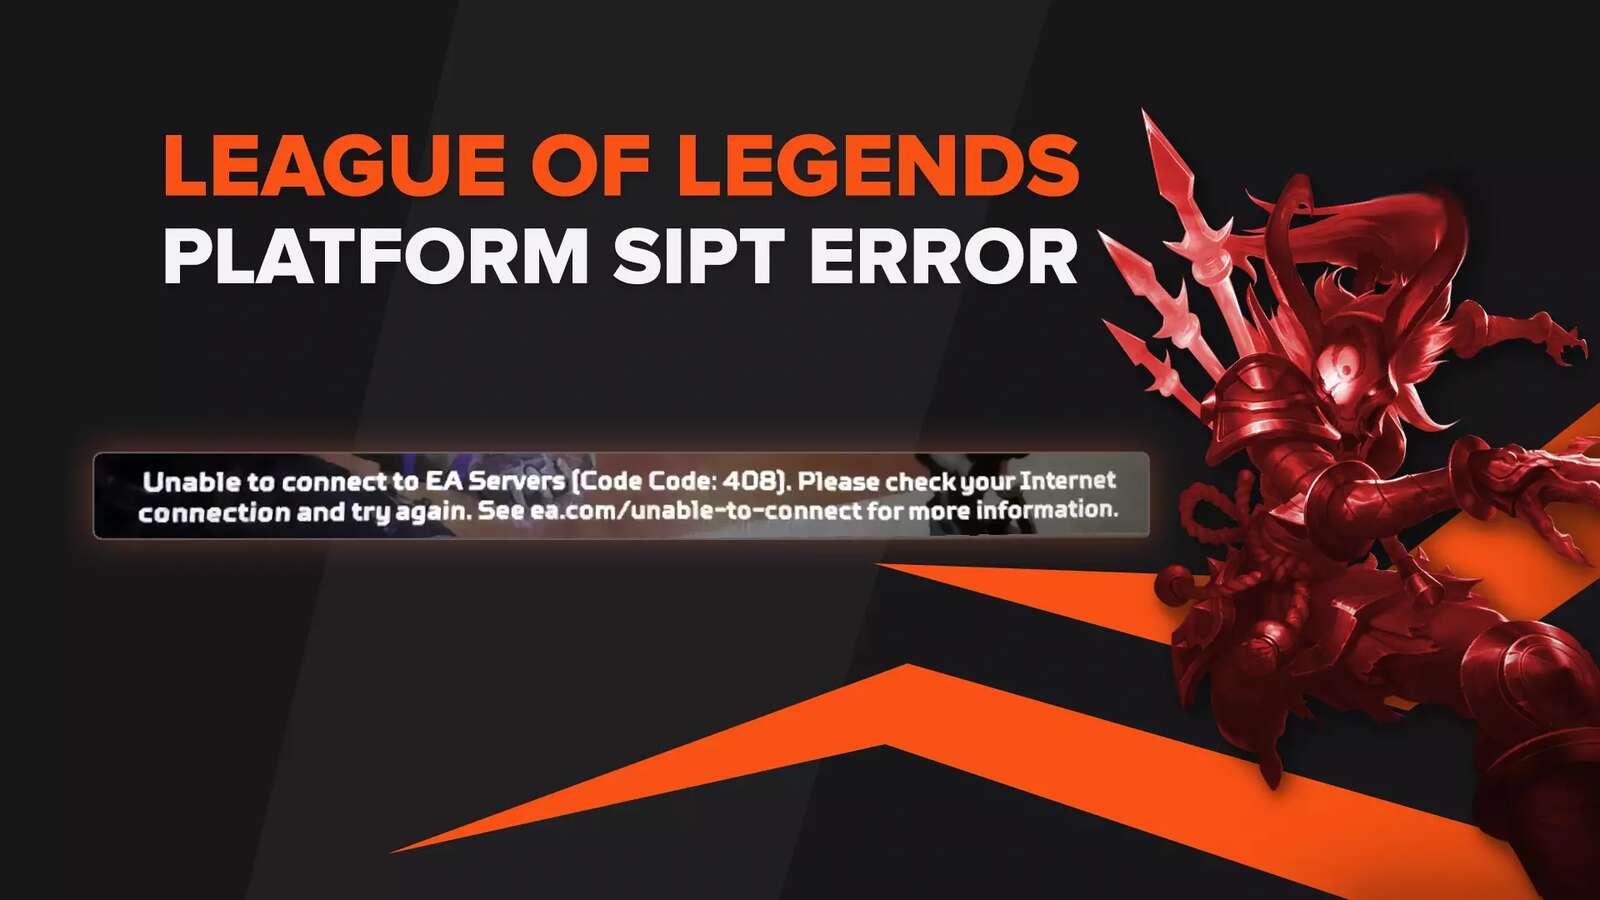 How to Fix Failed to Receive SIPT Platform Error in LoL